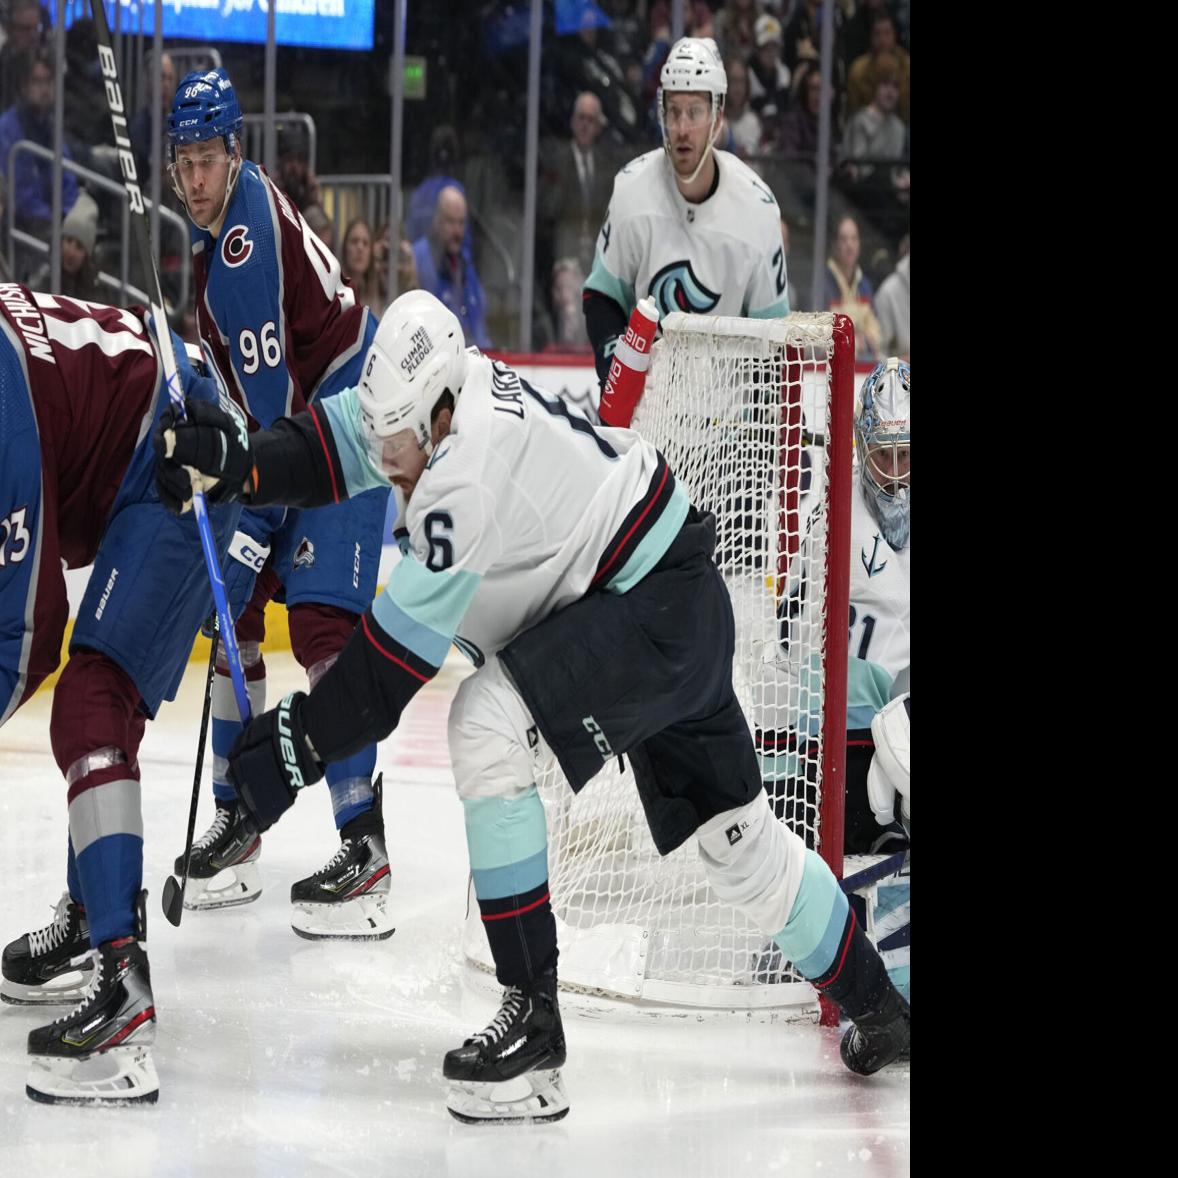 Colorado Avalanche: Who Should the Avalanche Play While Wearing